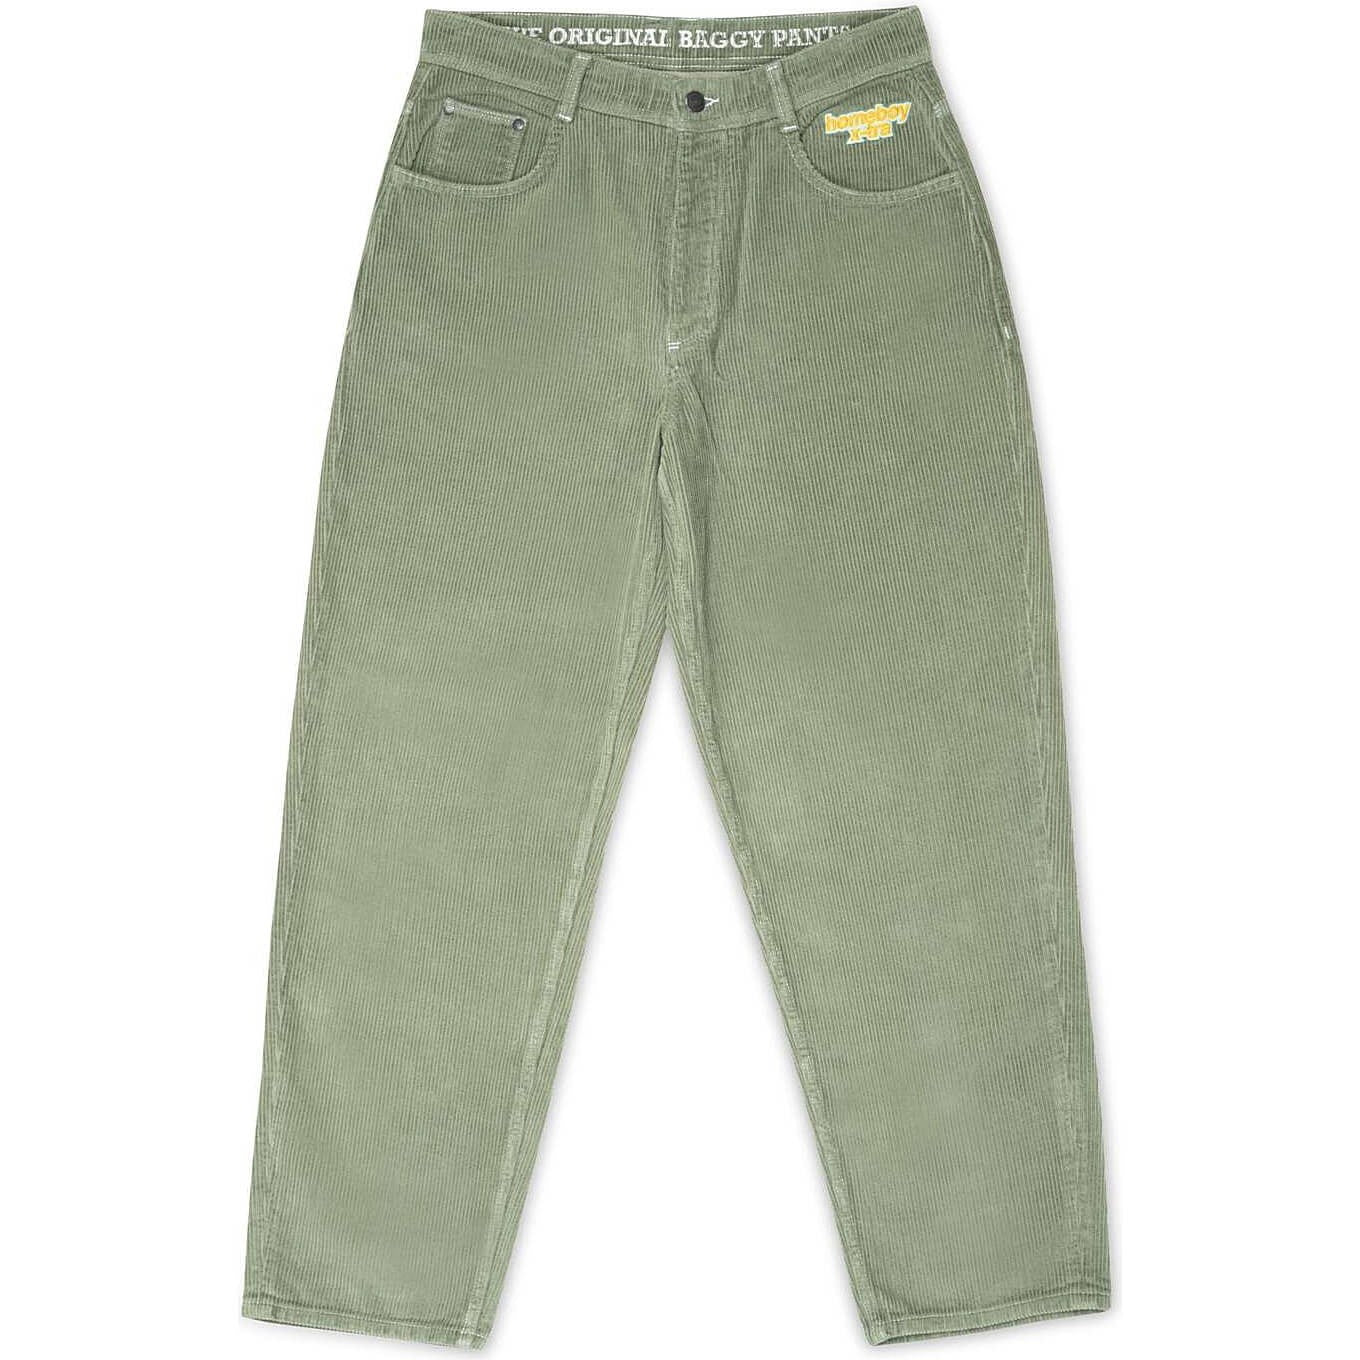 Homeboy x-tra BAGGY Cord pants OLIVE